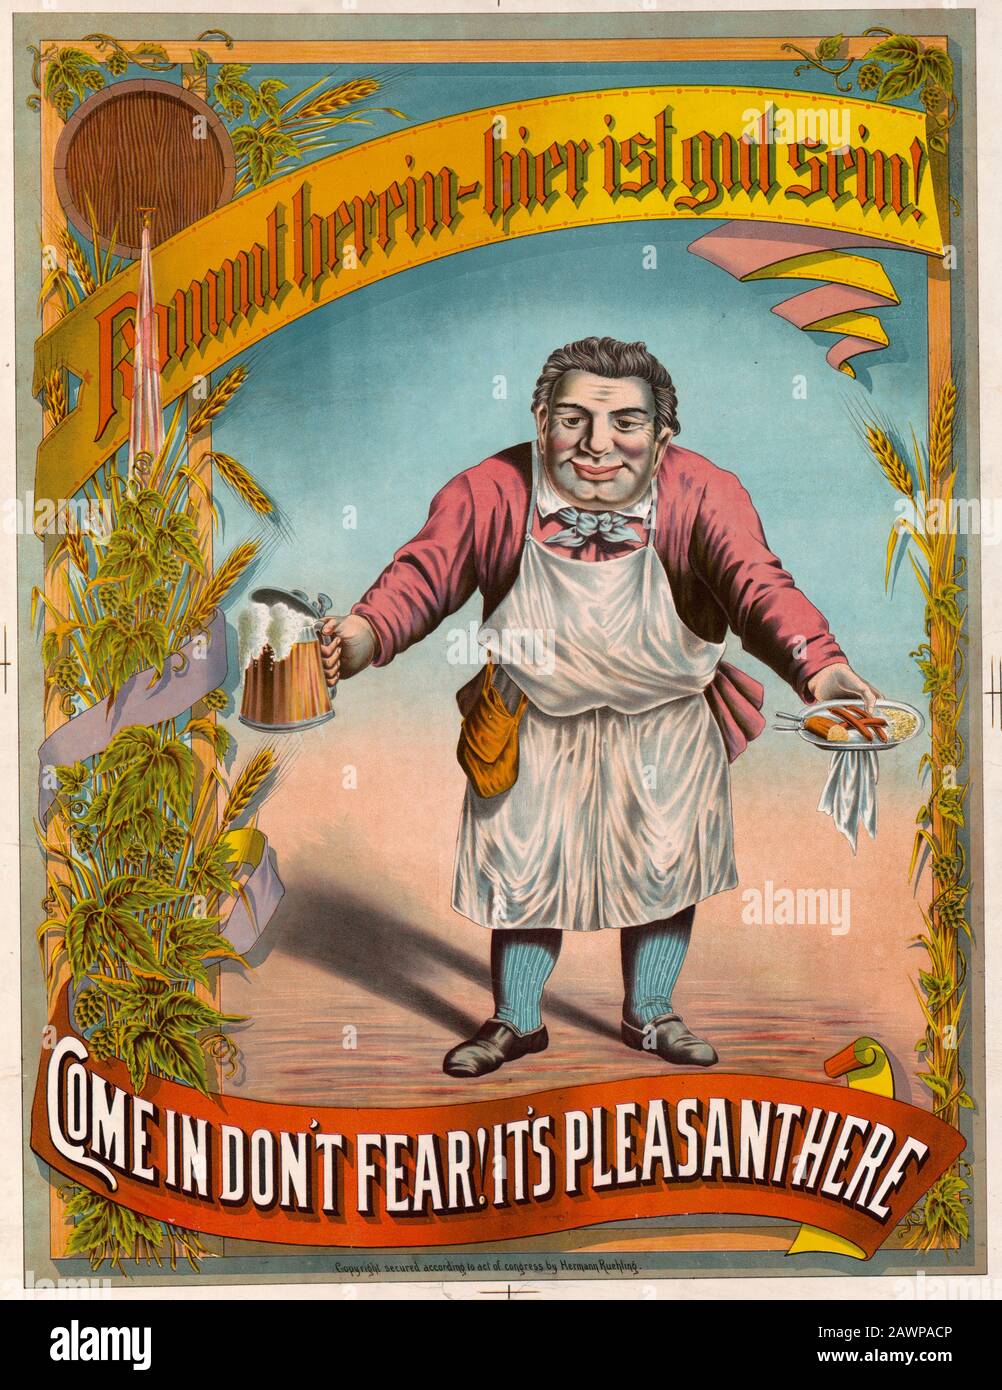 Kommt herrin beir ist gust sein! - come in, don't fear! it's pleasant here. Print of advertisement showing a man presenting to the viewer a stein of beer and a plate of food. 1887 Stock Photo